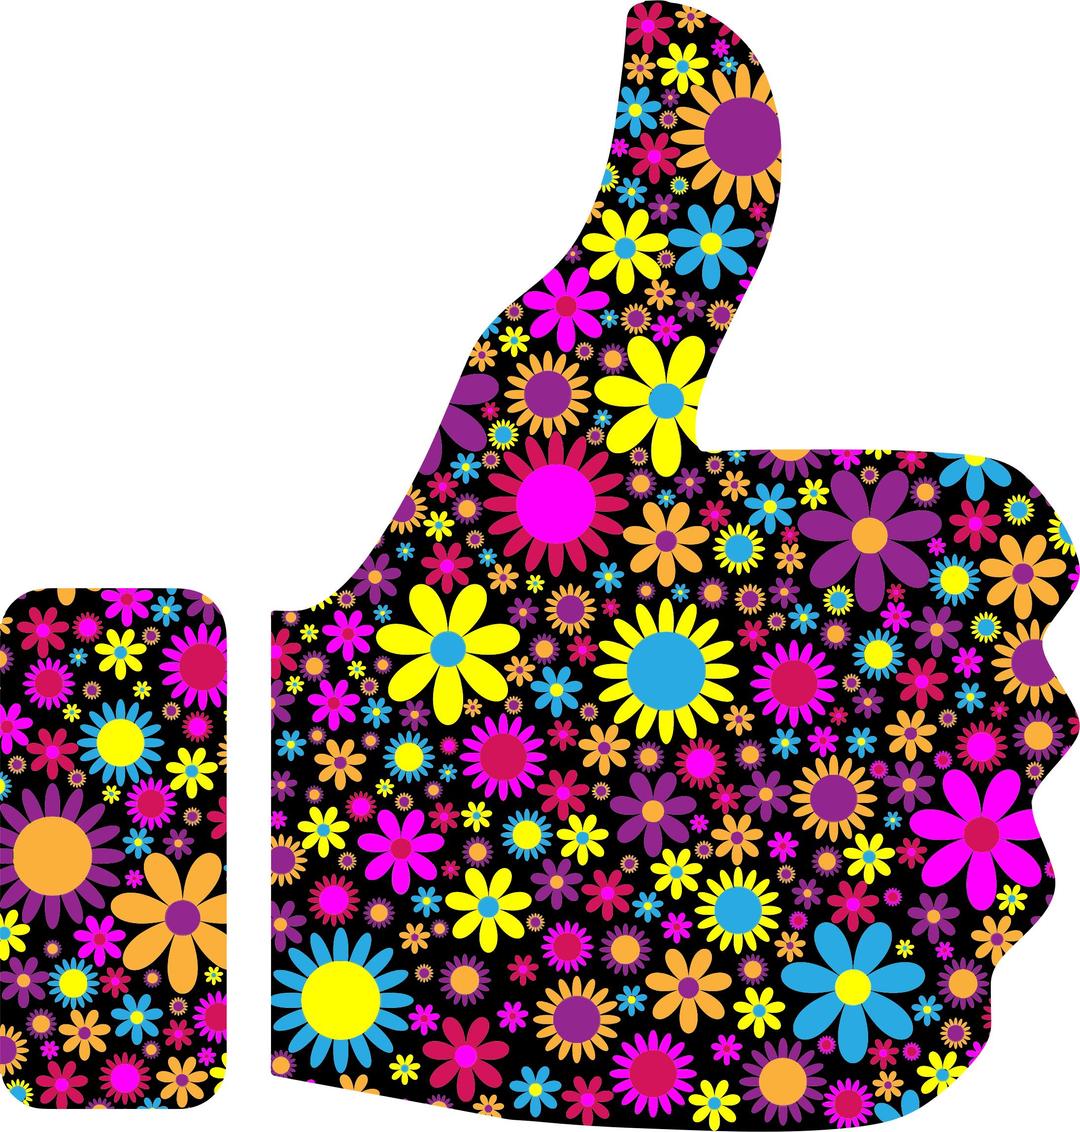 Floral Thumbs Up Silhouette png transparent